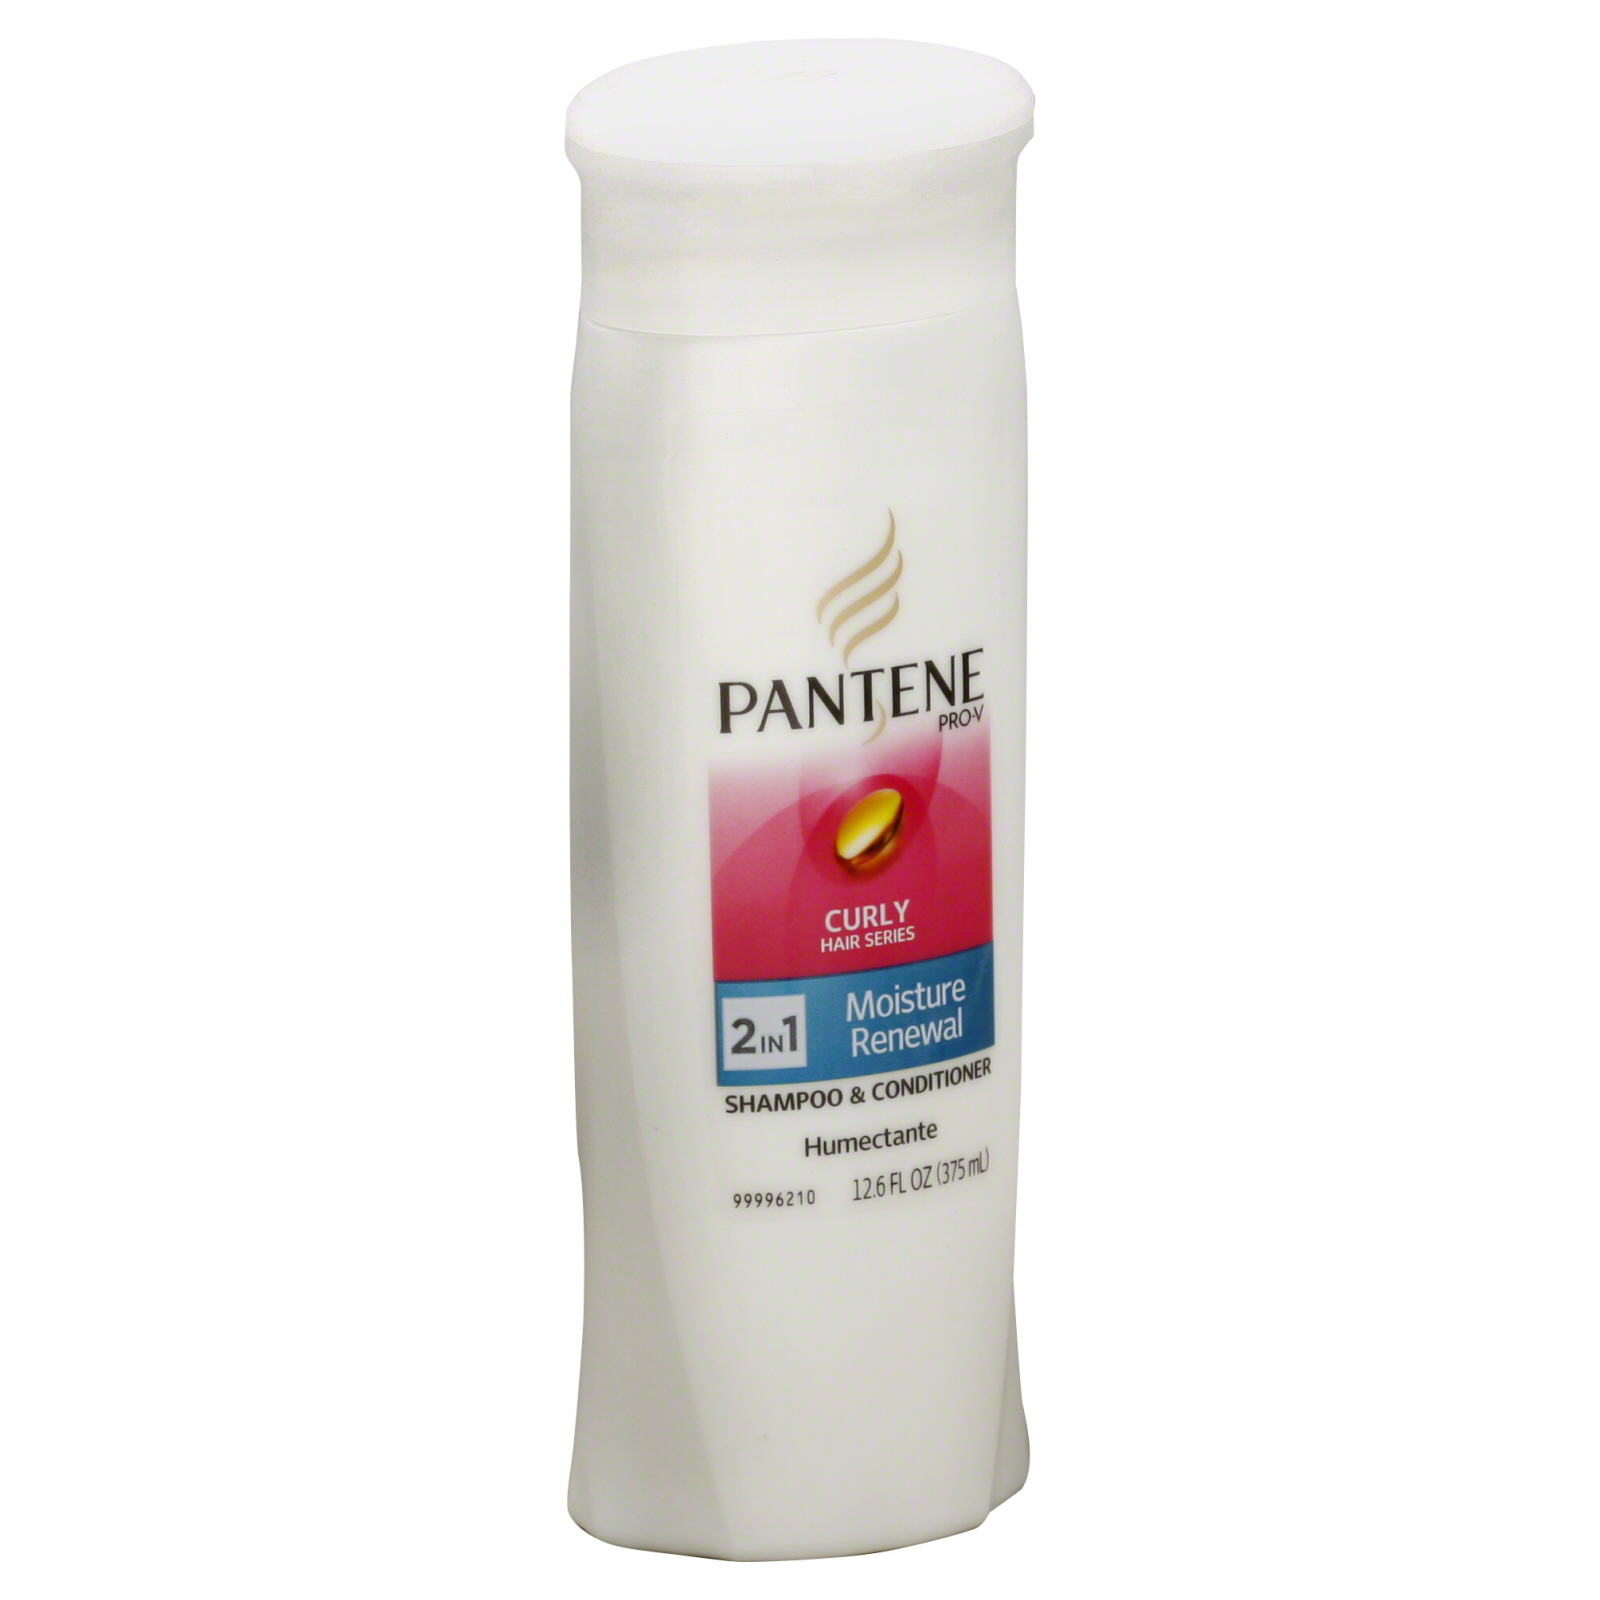 Pantene Pro-V Curl Perfection 2in1 Shampoo and Conditioner for Curly Hair 12.6 fl oz